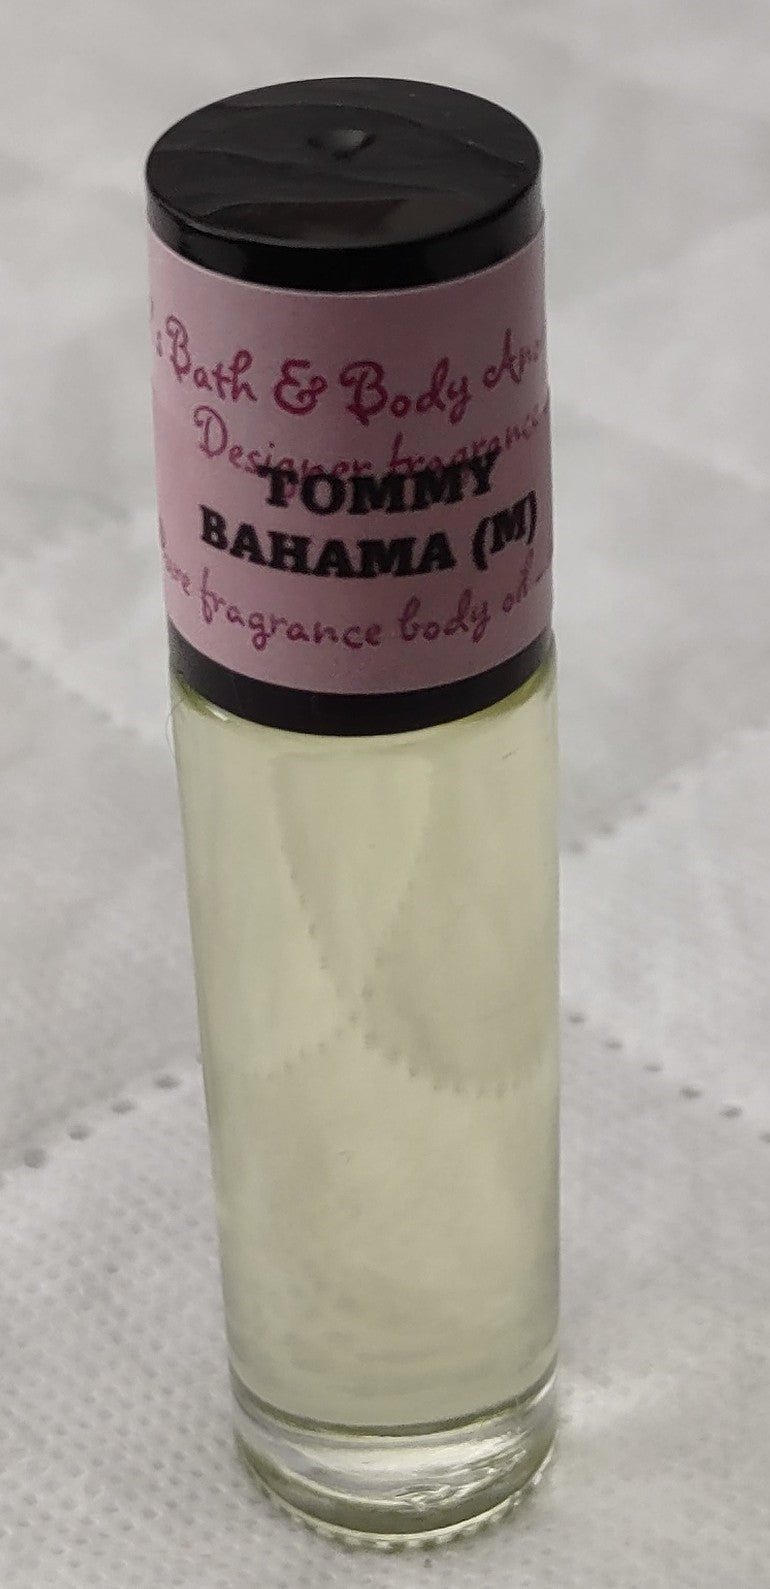 Tommy Bahama for men - our impression.